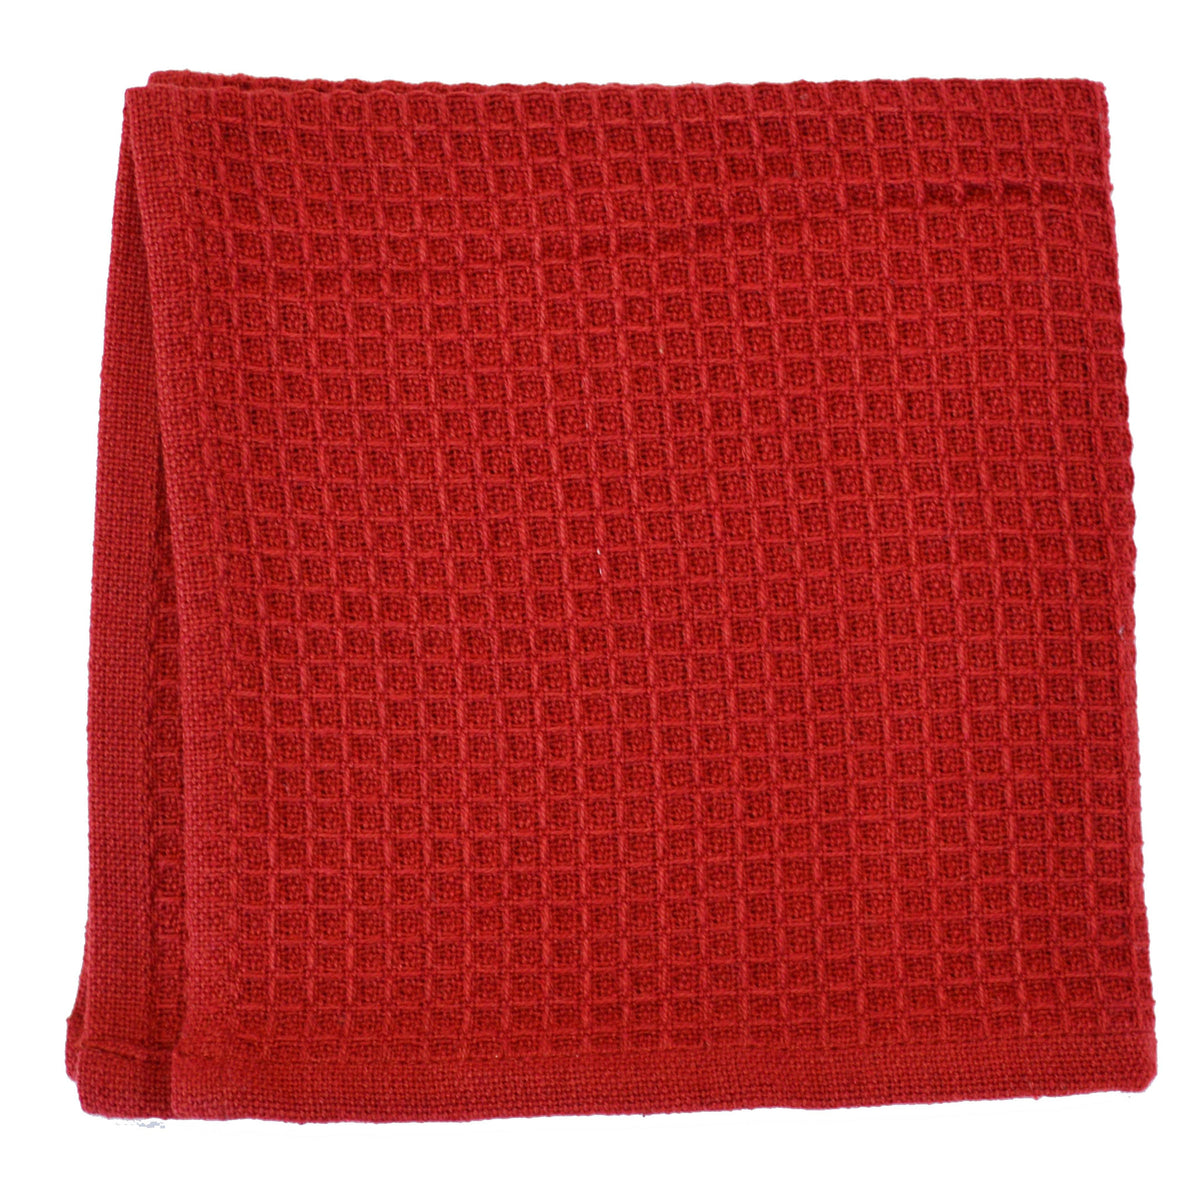 13×13 Waffle Weave Dish Cloth - Bright Red – Miller's Dry Goods